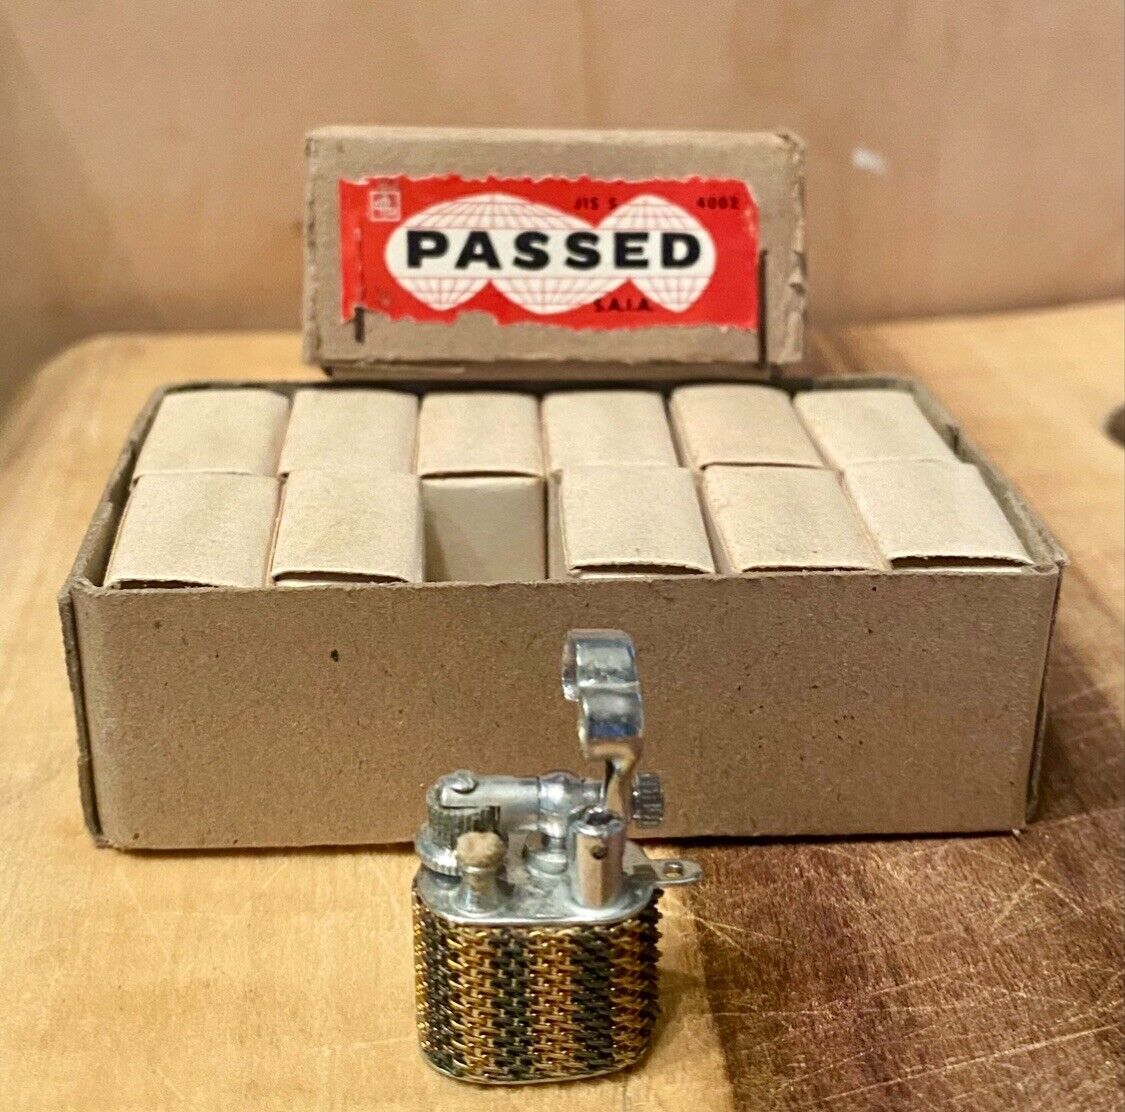 Box Of 12 Vintage 1940’s Pygmy Mini Lighters Made in Japan. Never Used. Rare